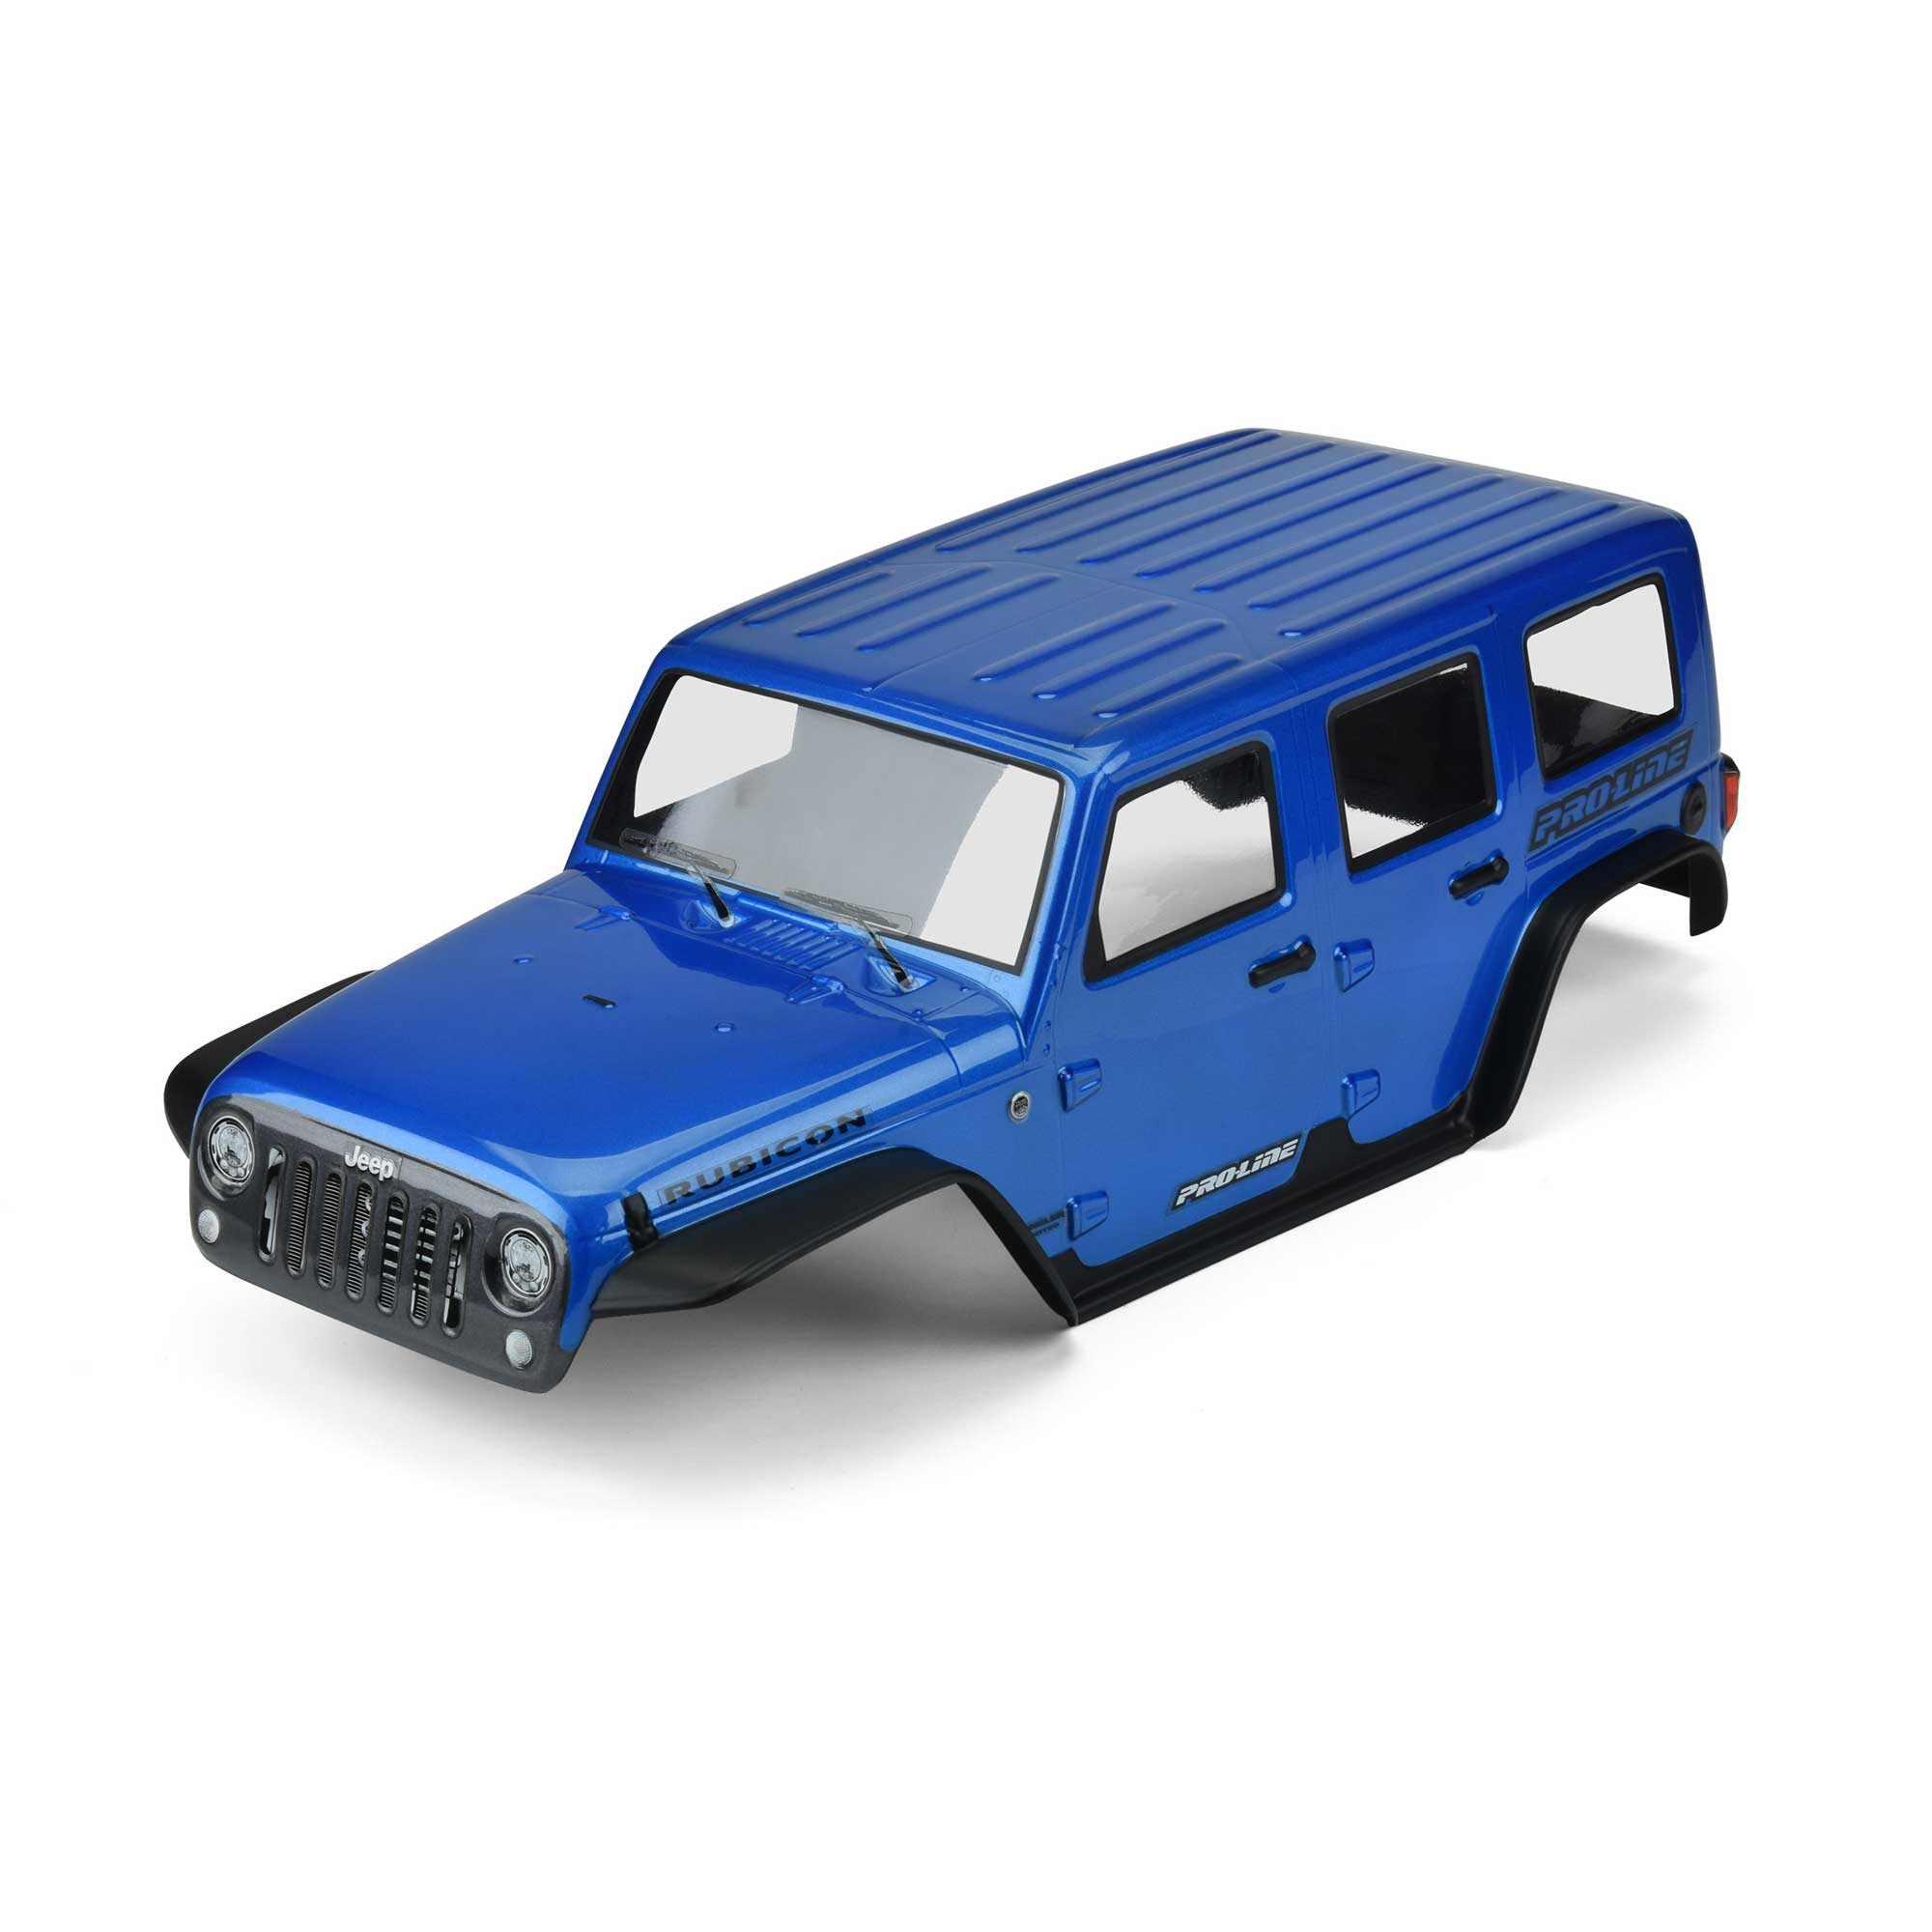 Pro Line Racing 1 10 Jeep Wrangler Unlimited Rubicon Painted Body Blue With 12 8 Wheelbase Trx 4 Pro Line